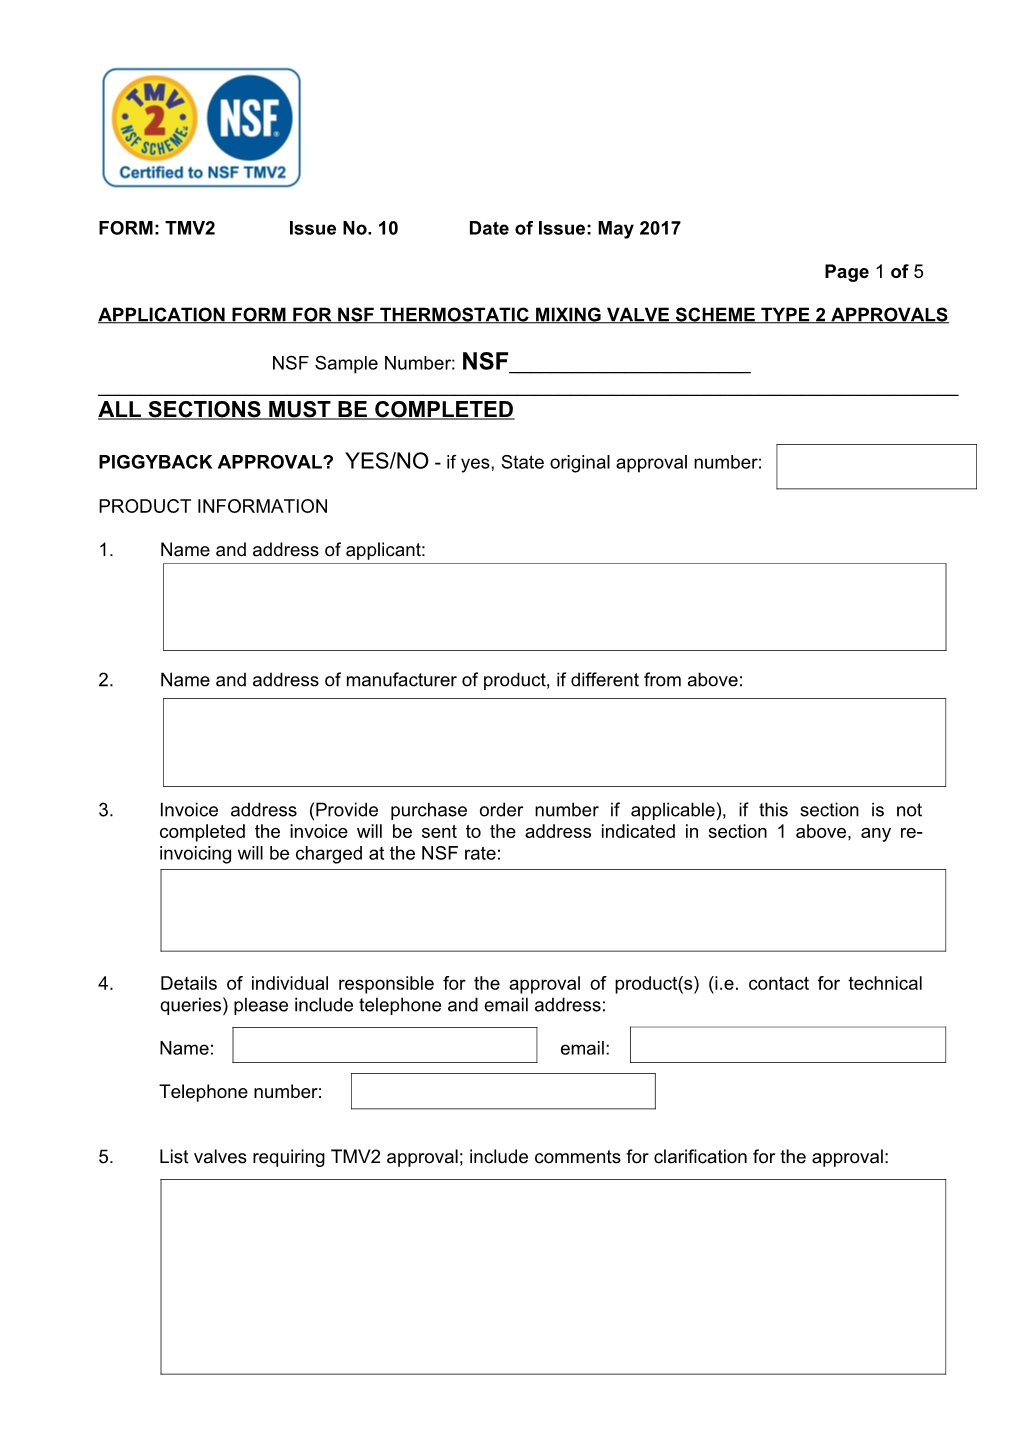 Application Form for Nsf Thermostatic Mixing Valve Scheme Type 2 Approvals